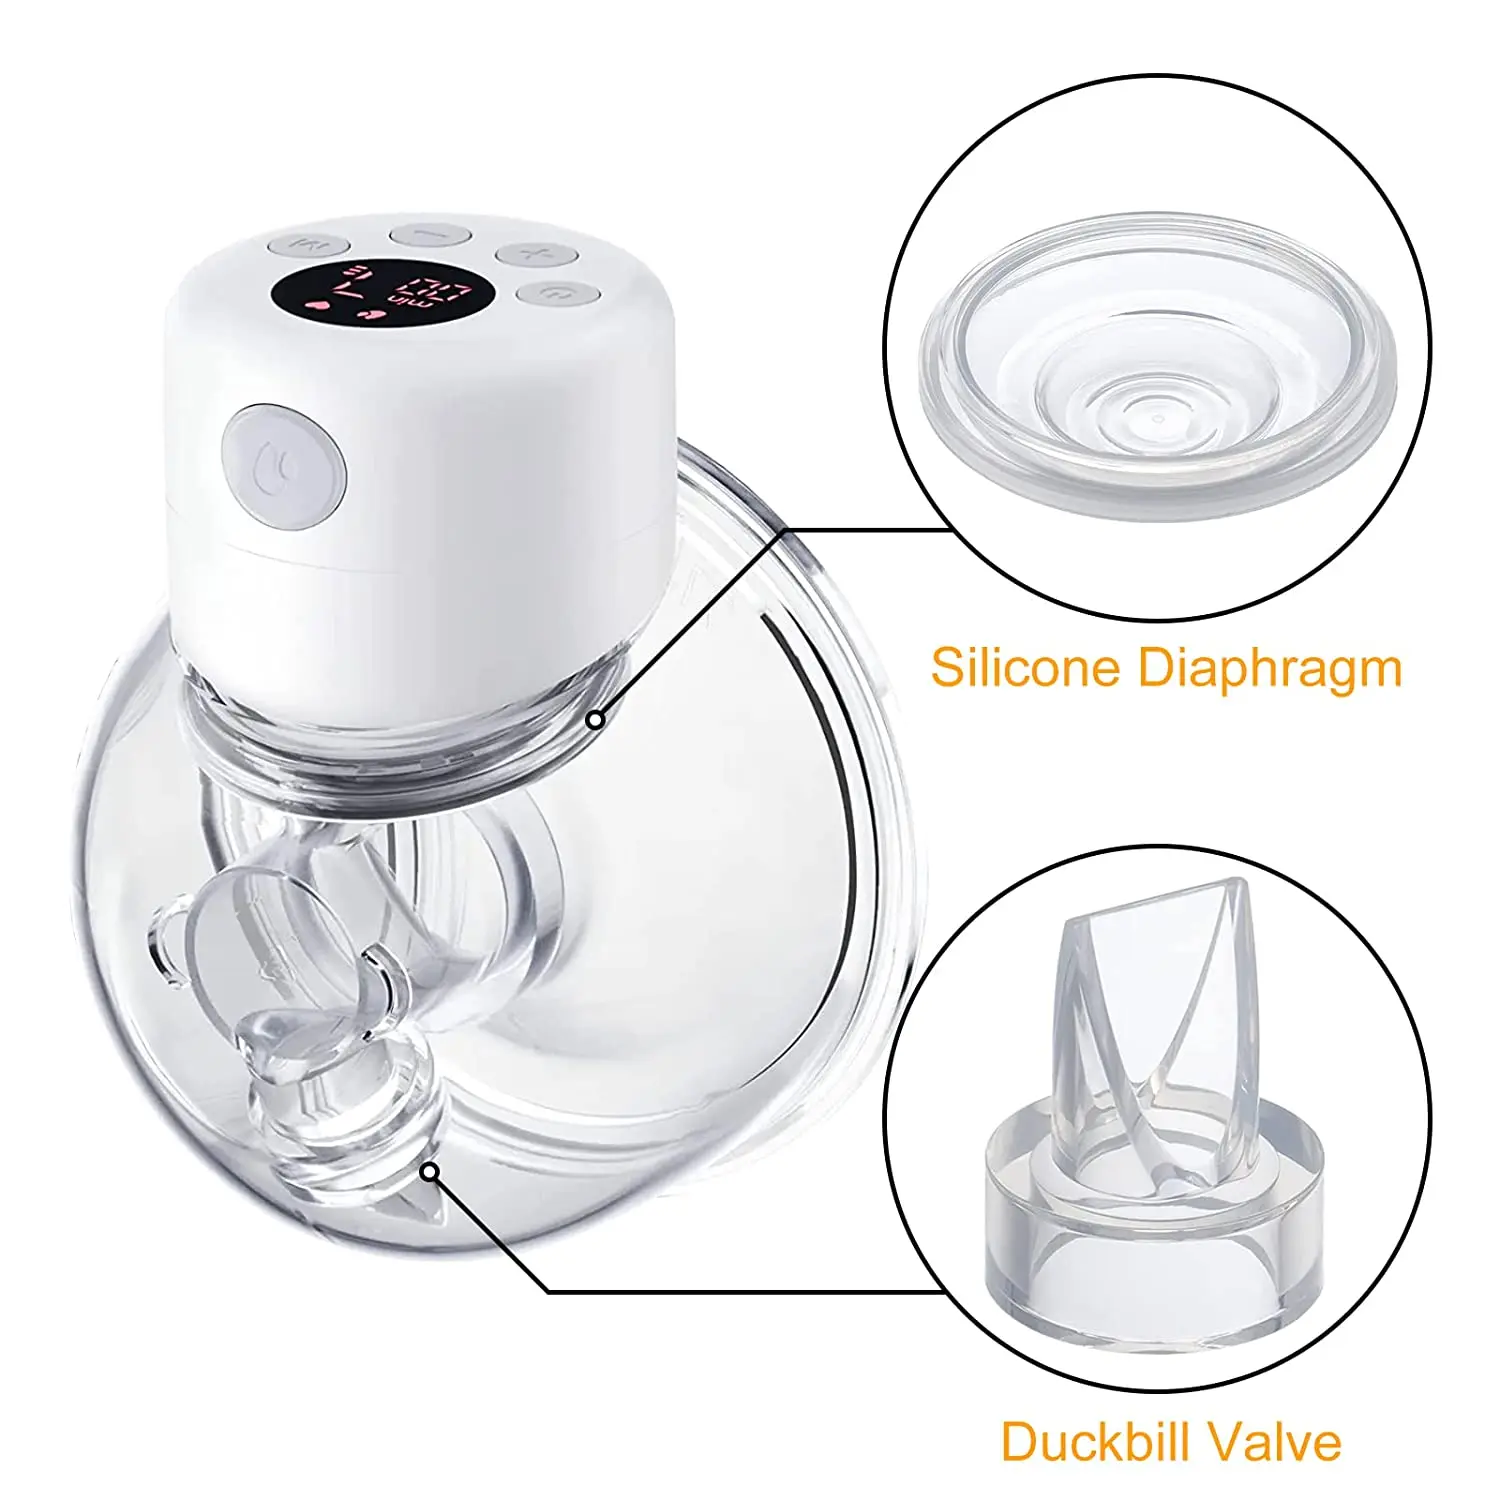 Duckbill Valve and Silicone Diaphragm,Compatible With Electric Breast Pump，Pump Parts/Accessories (10 Piece Set)